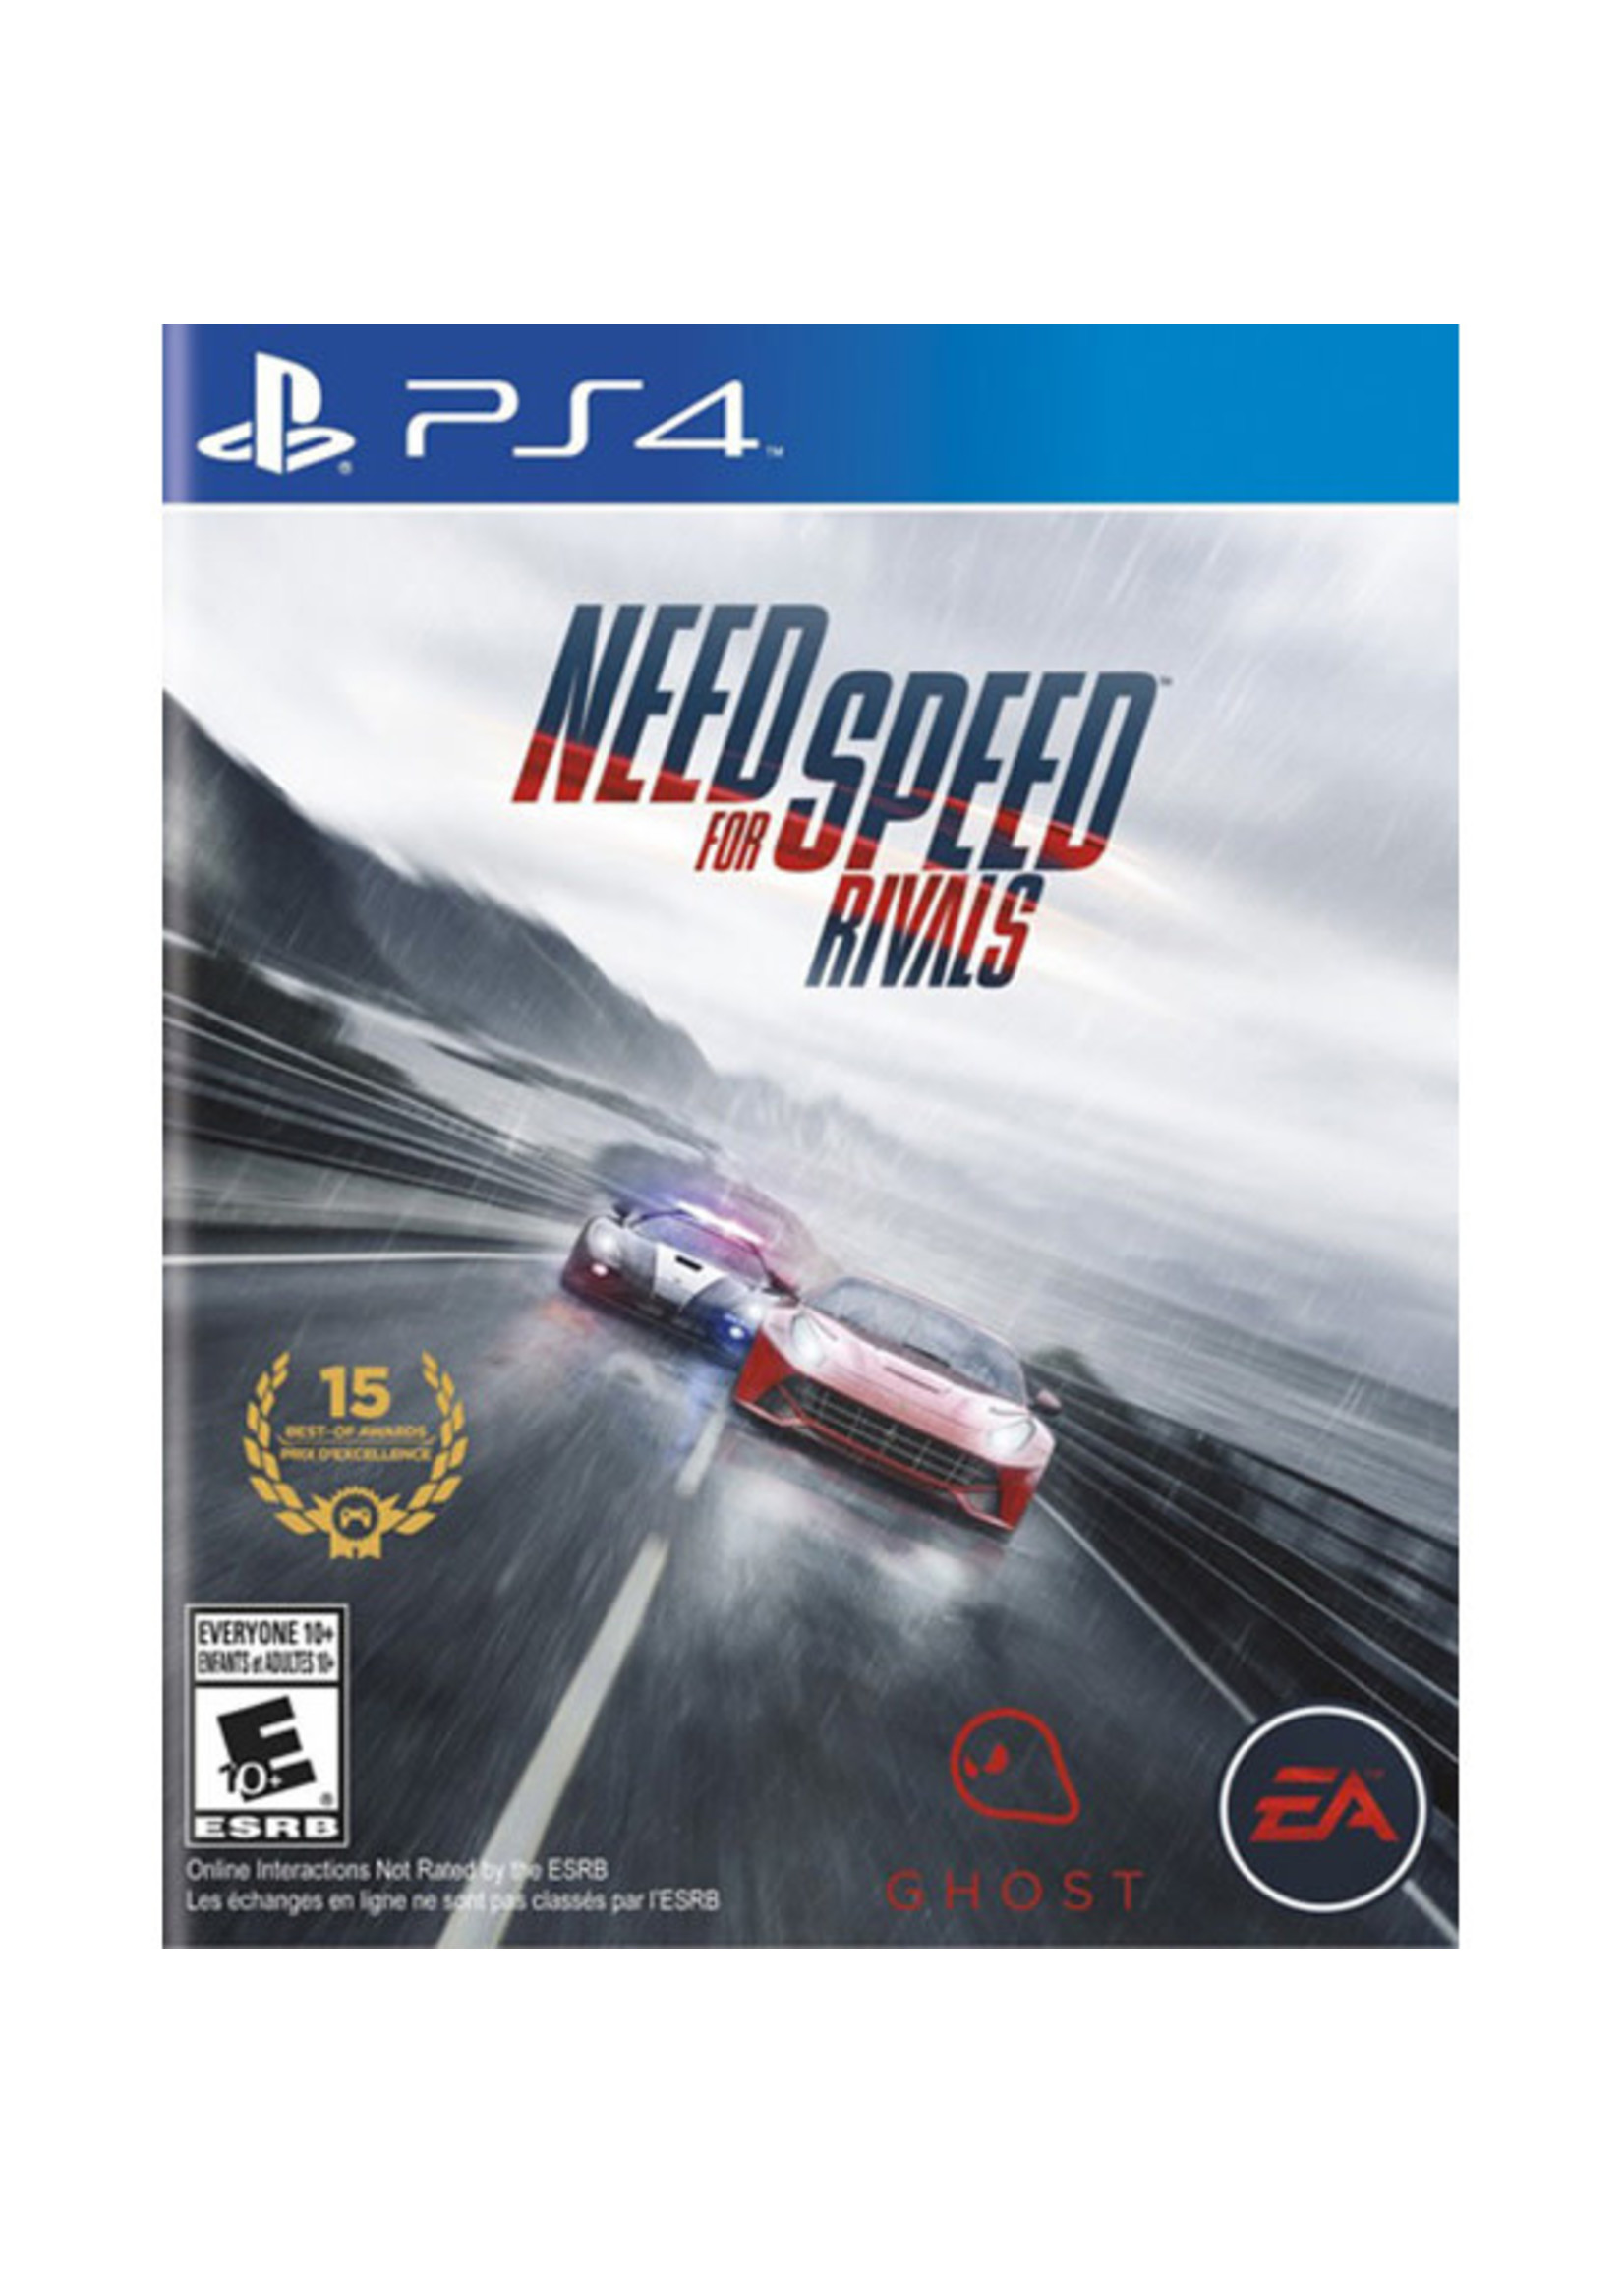 NEED FOR SPEED RIVALS PS4 (USAGÉ)